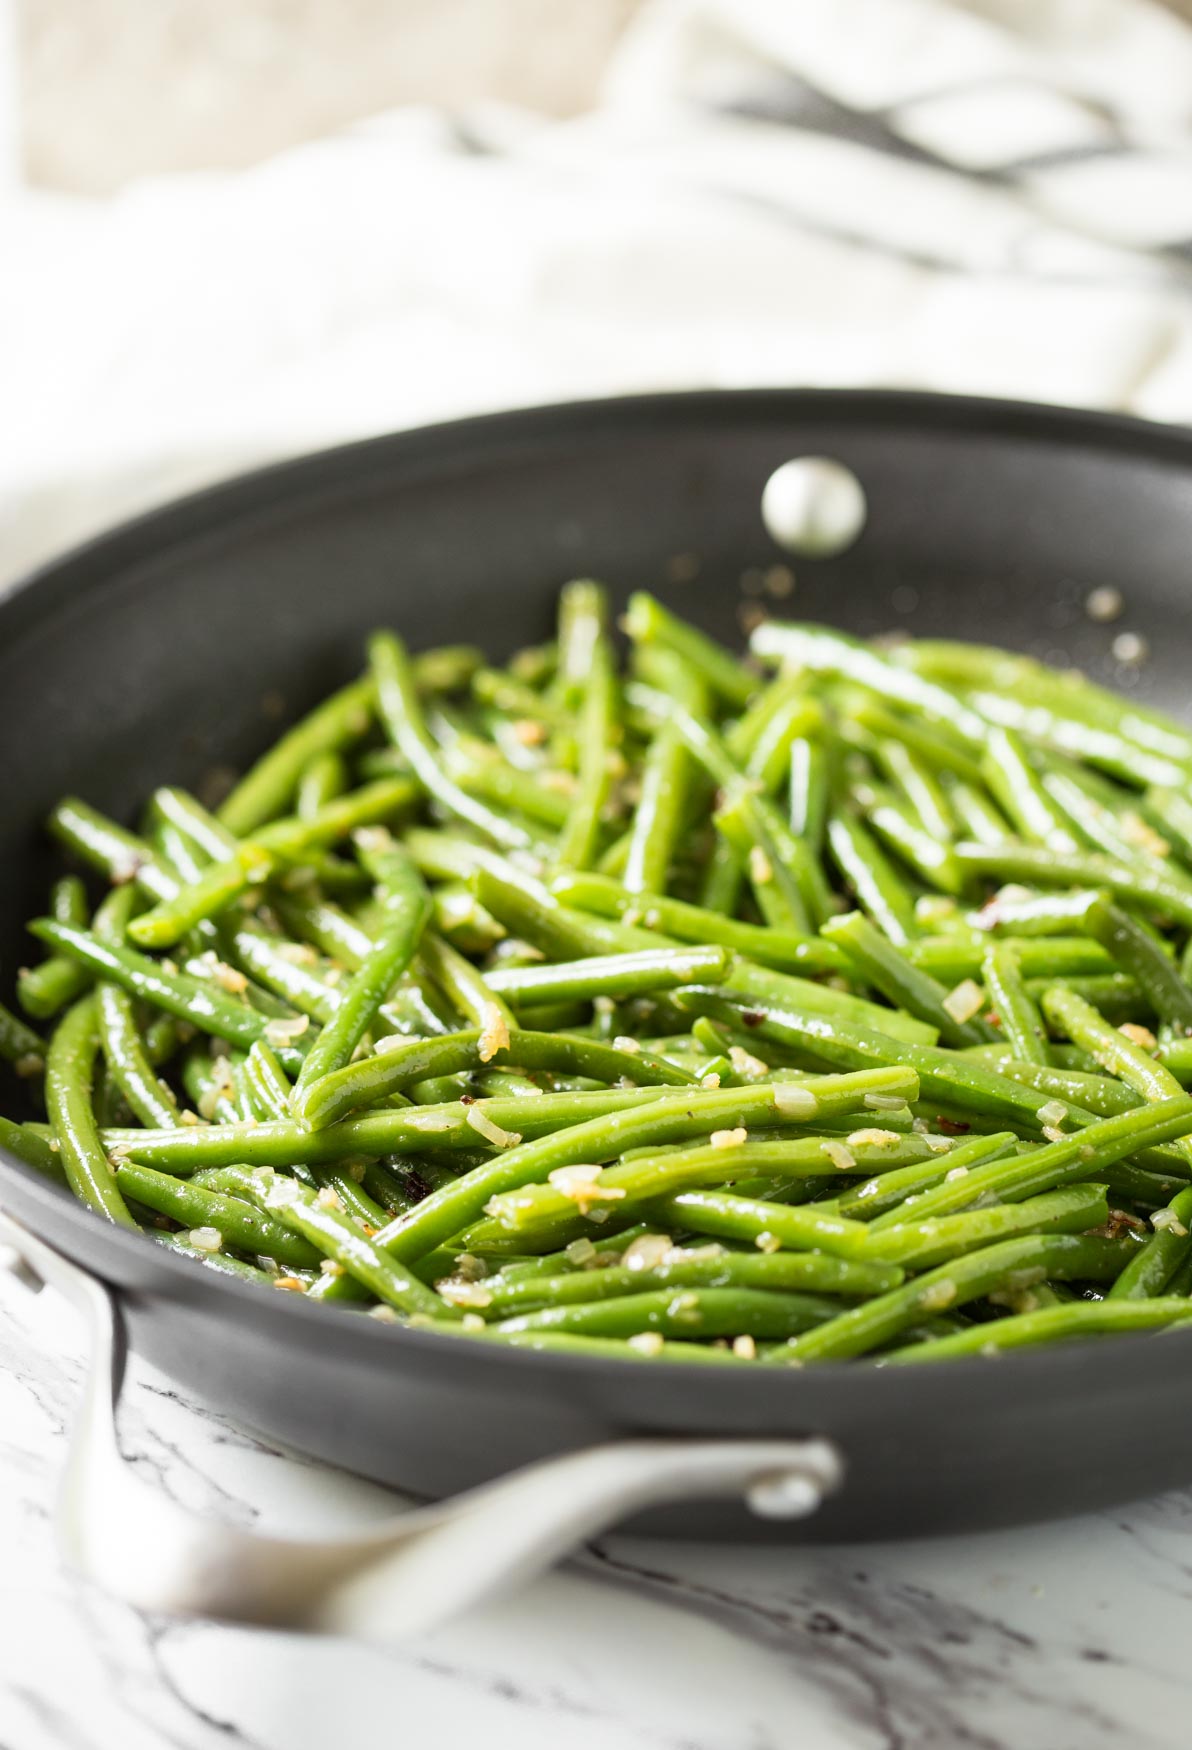 Sauteed garlic green beans in a skillet